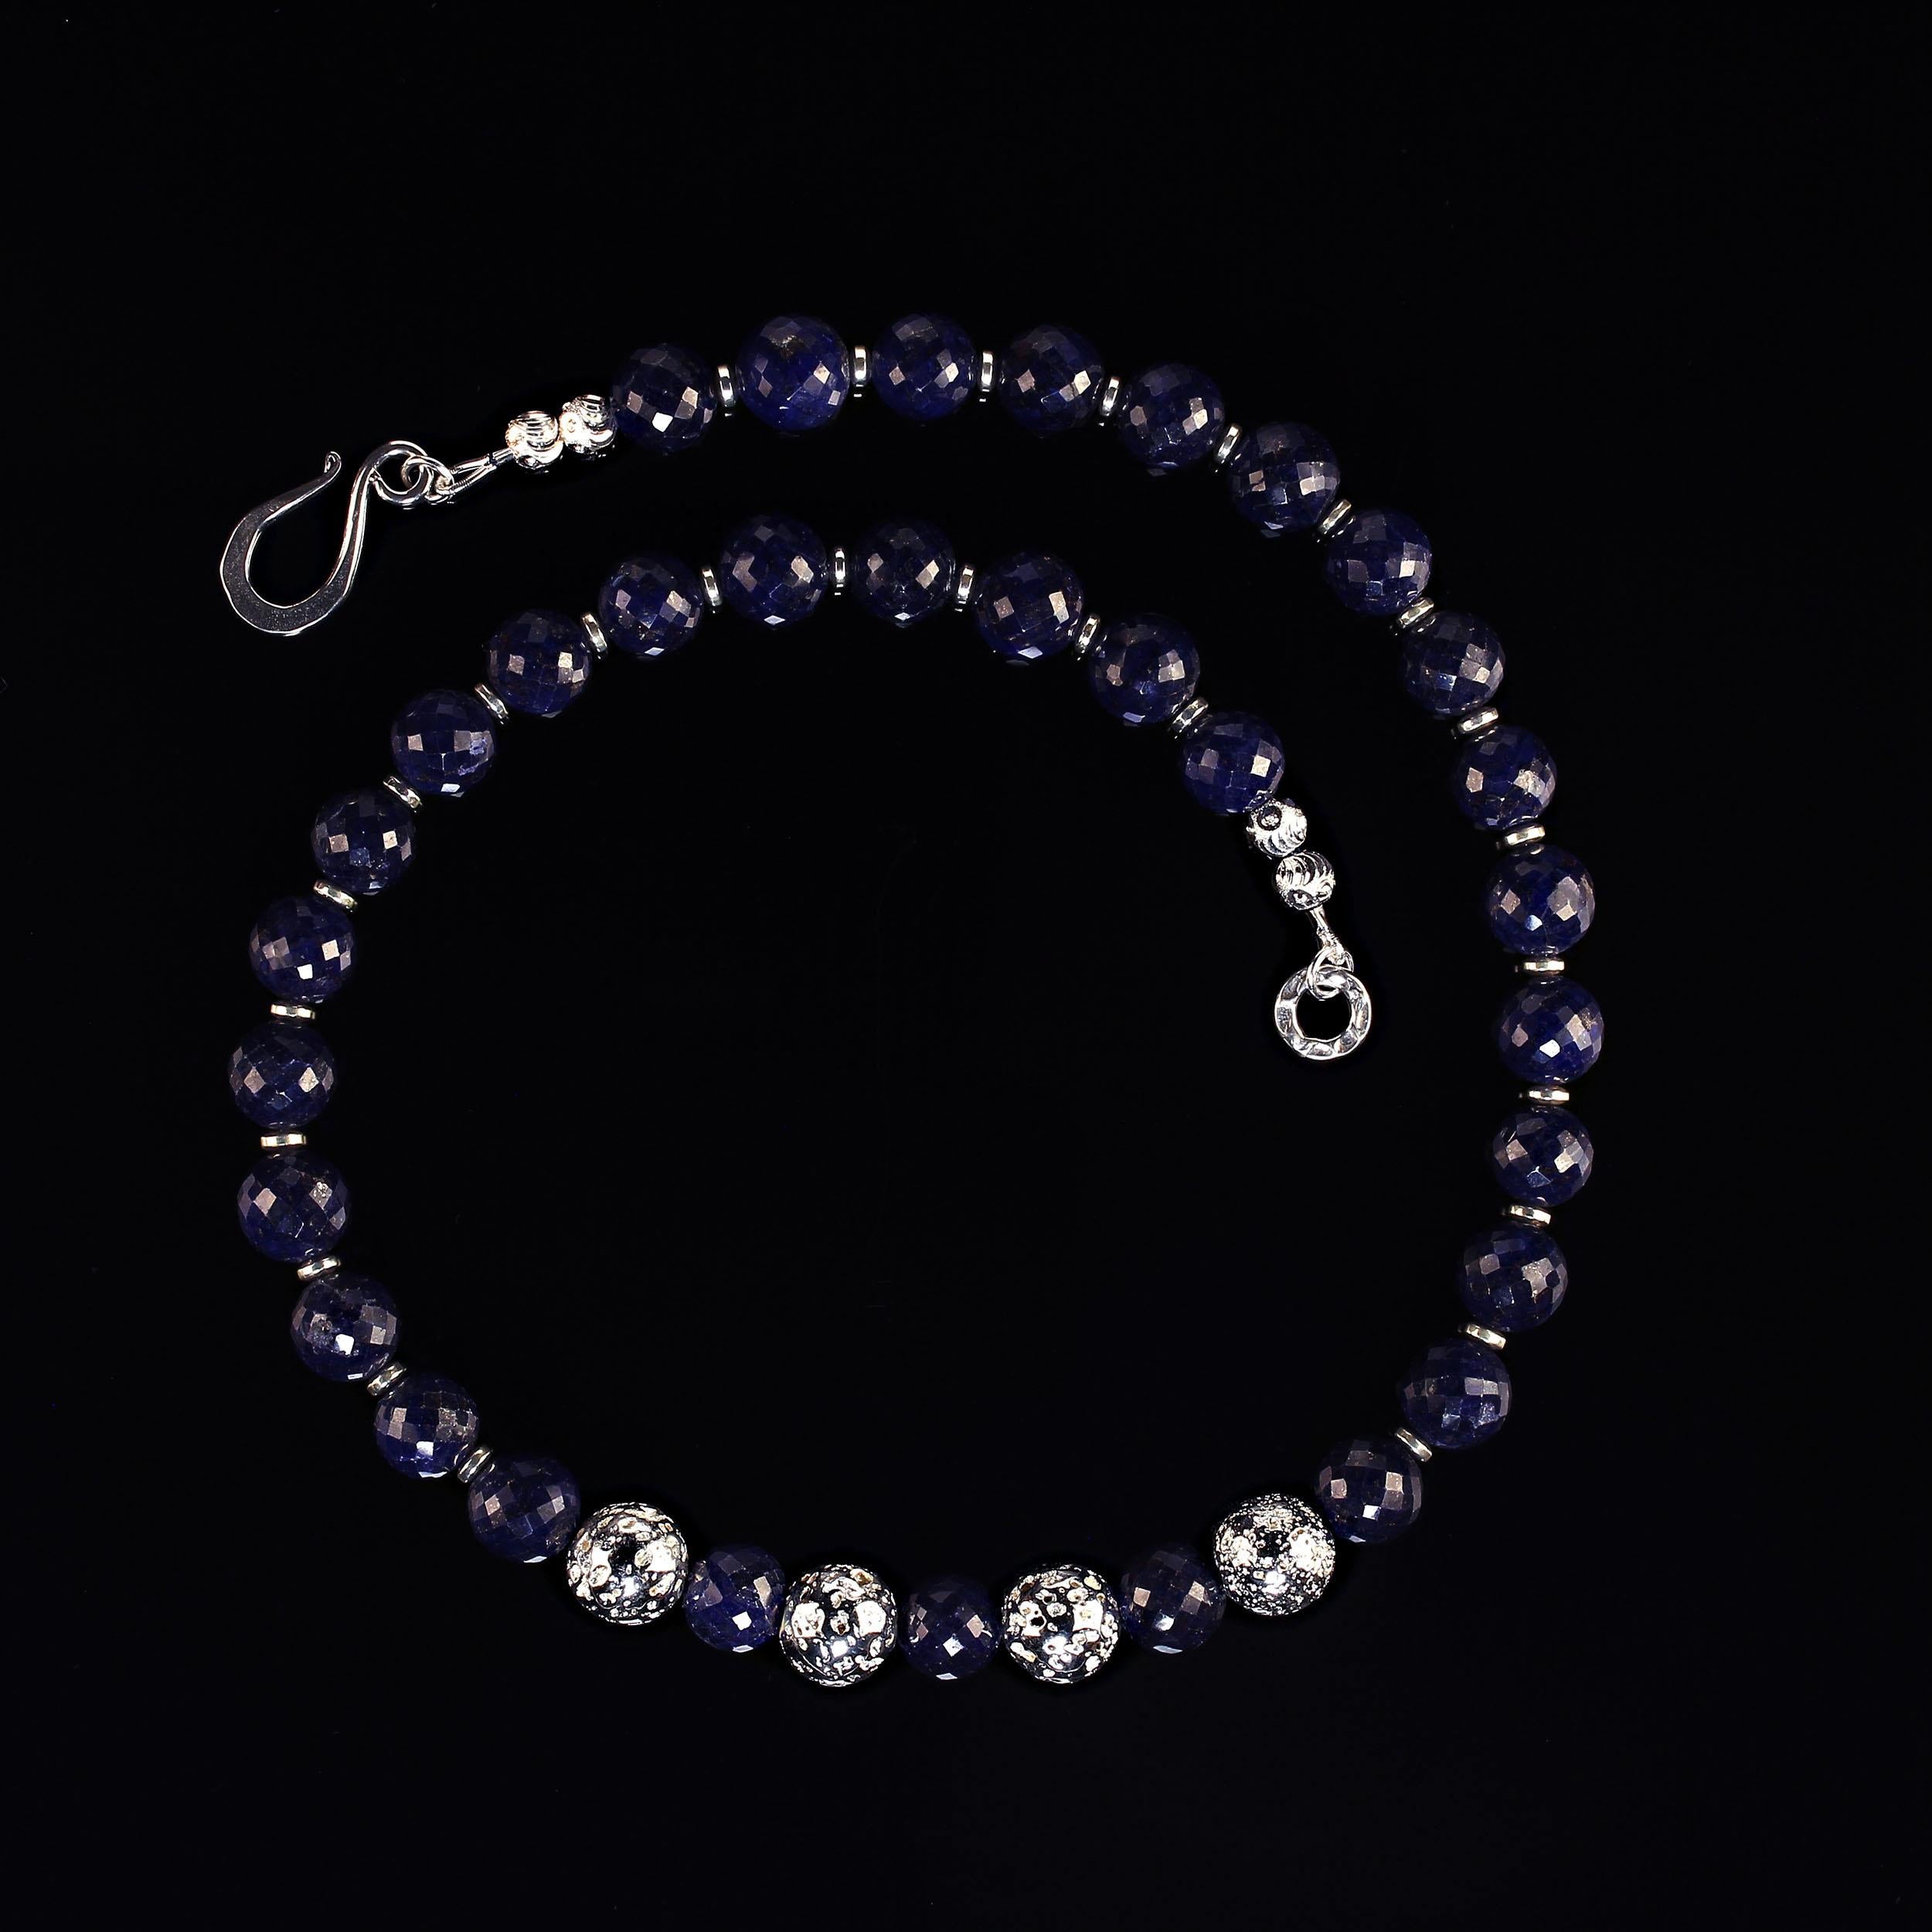 Artisan AJD Stunning 21 Inch Blue Sapphire necklace with Silver accents For Sale